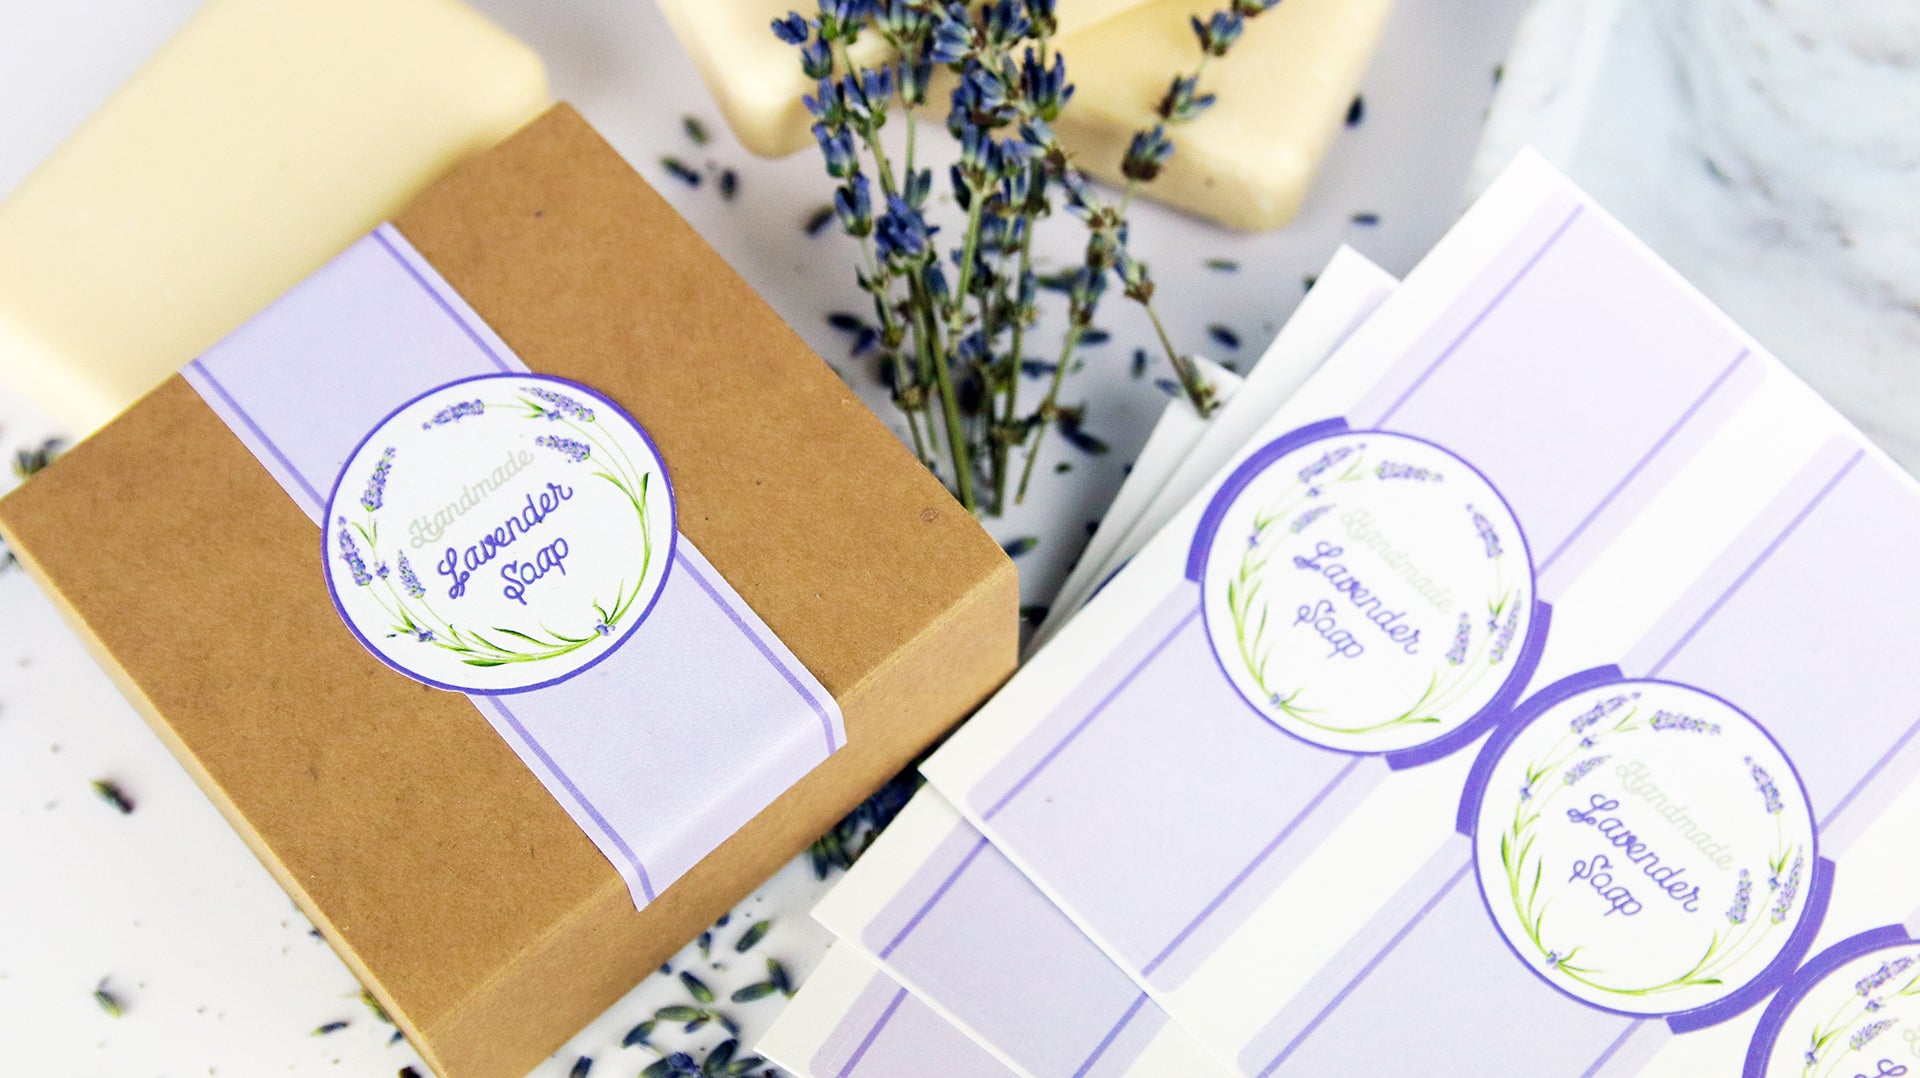 Die-cut biodegradable paper packaging labels applied to a cardboard box filled with lavender soap